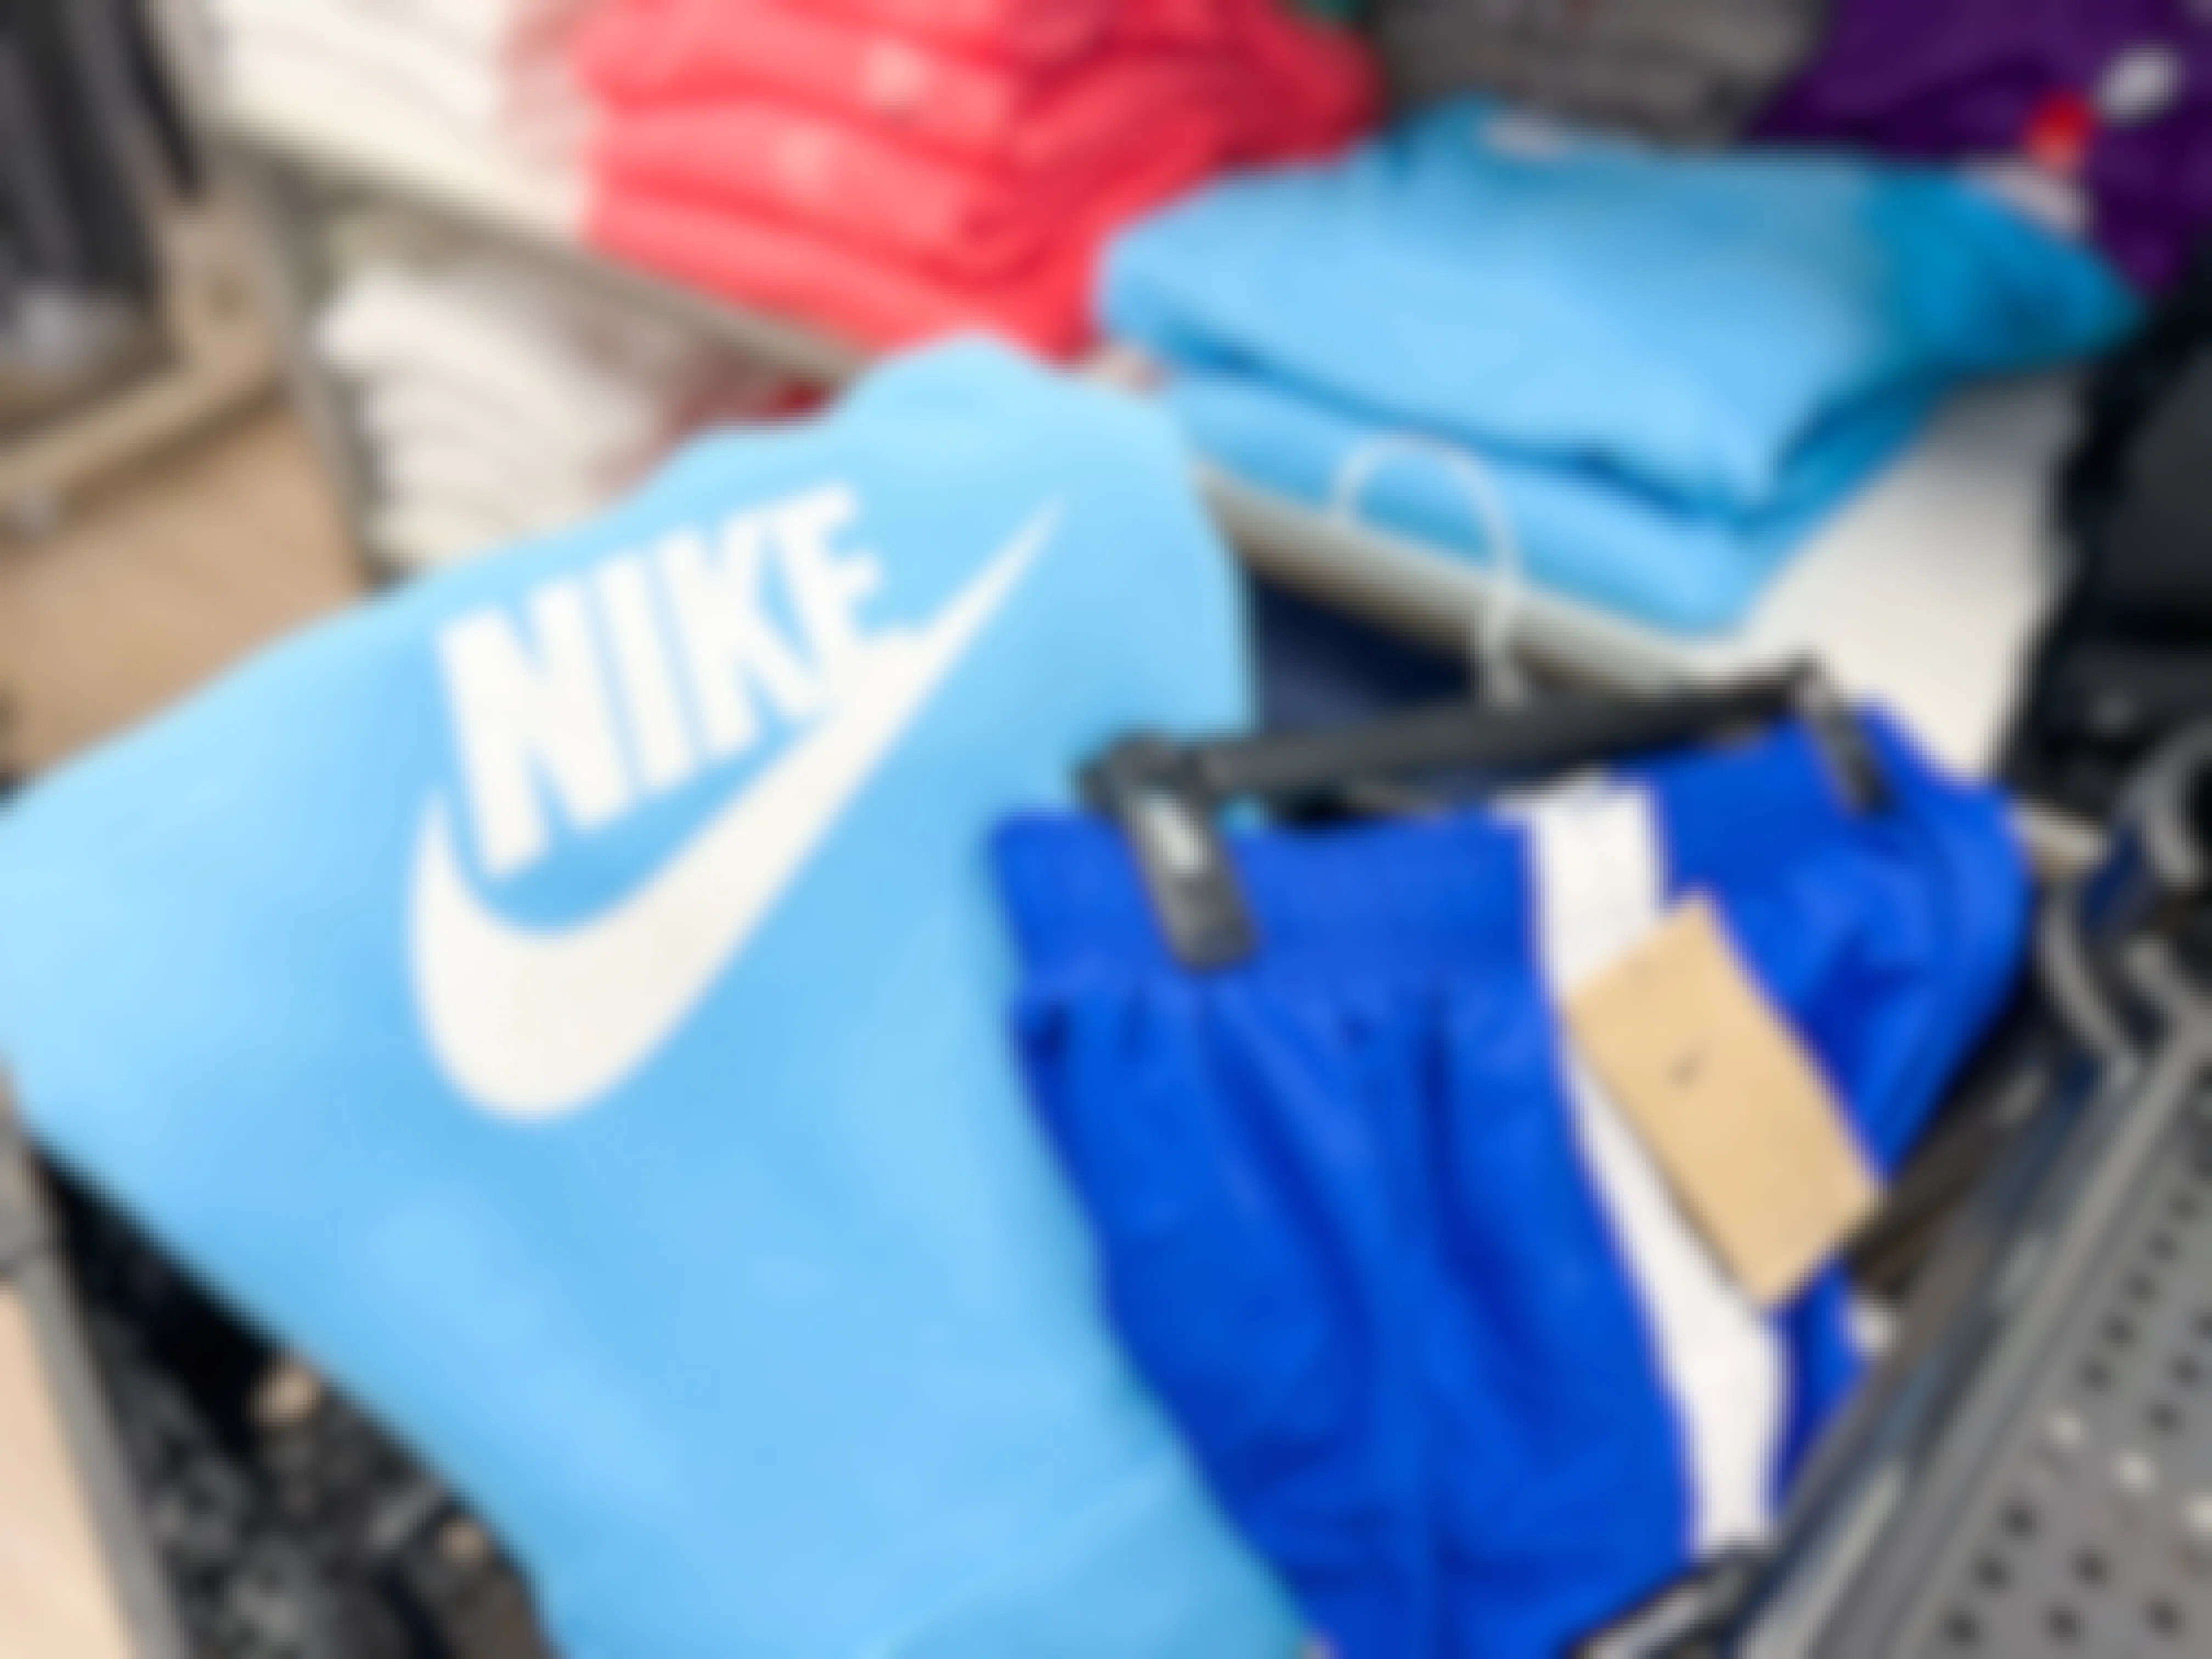 Nike & Under Armour Summer Apparel, 50% Off at Kohl's